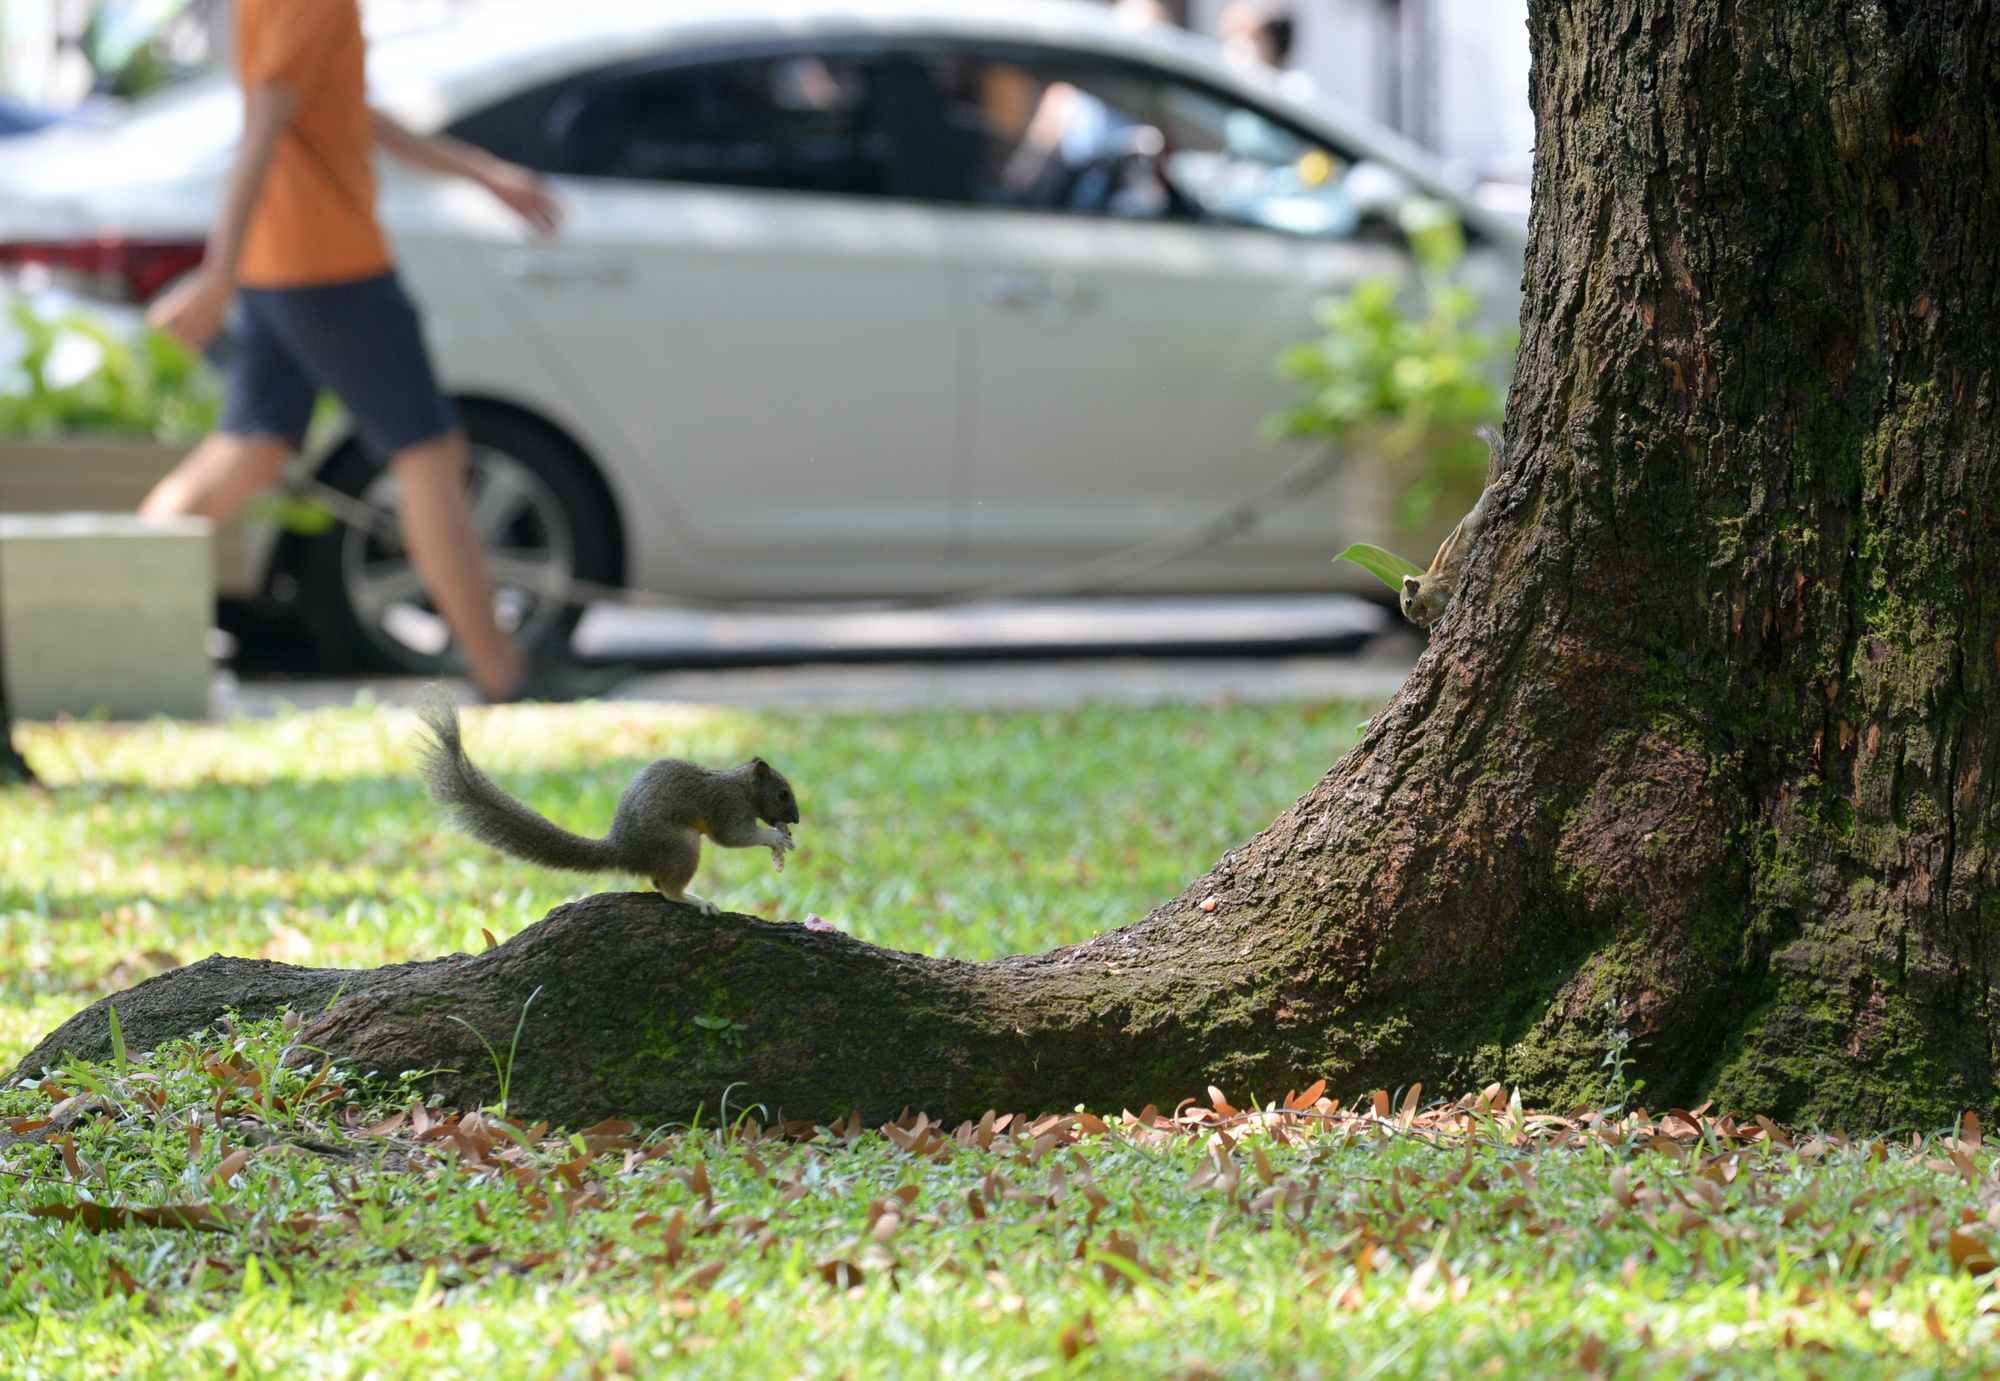 A squirrel is seen in April 30 Park in Ho Chi Minh City, Vietnam. Photo: T.T.D. / Tuoi Tre